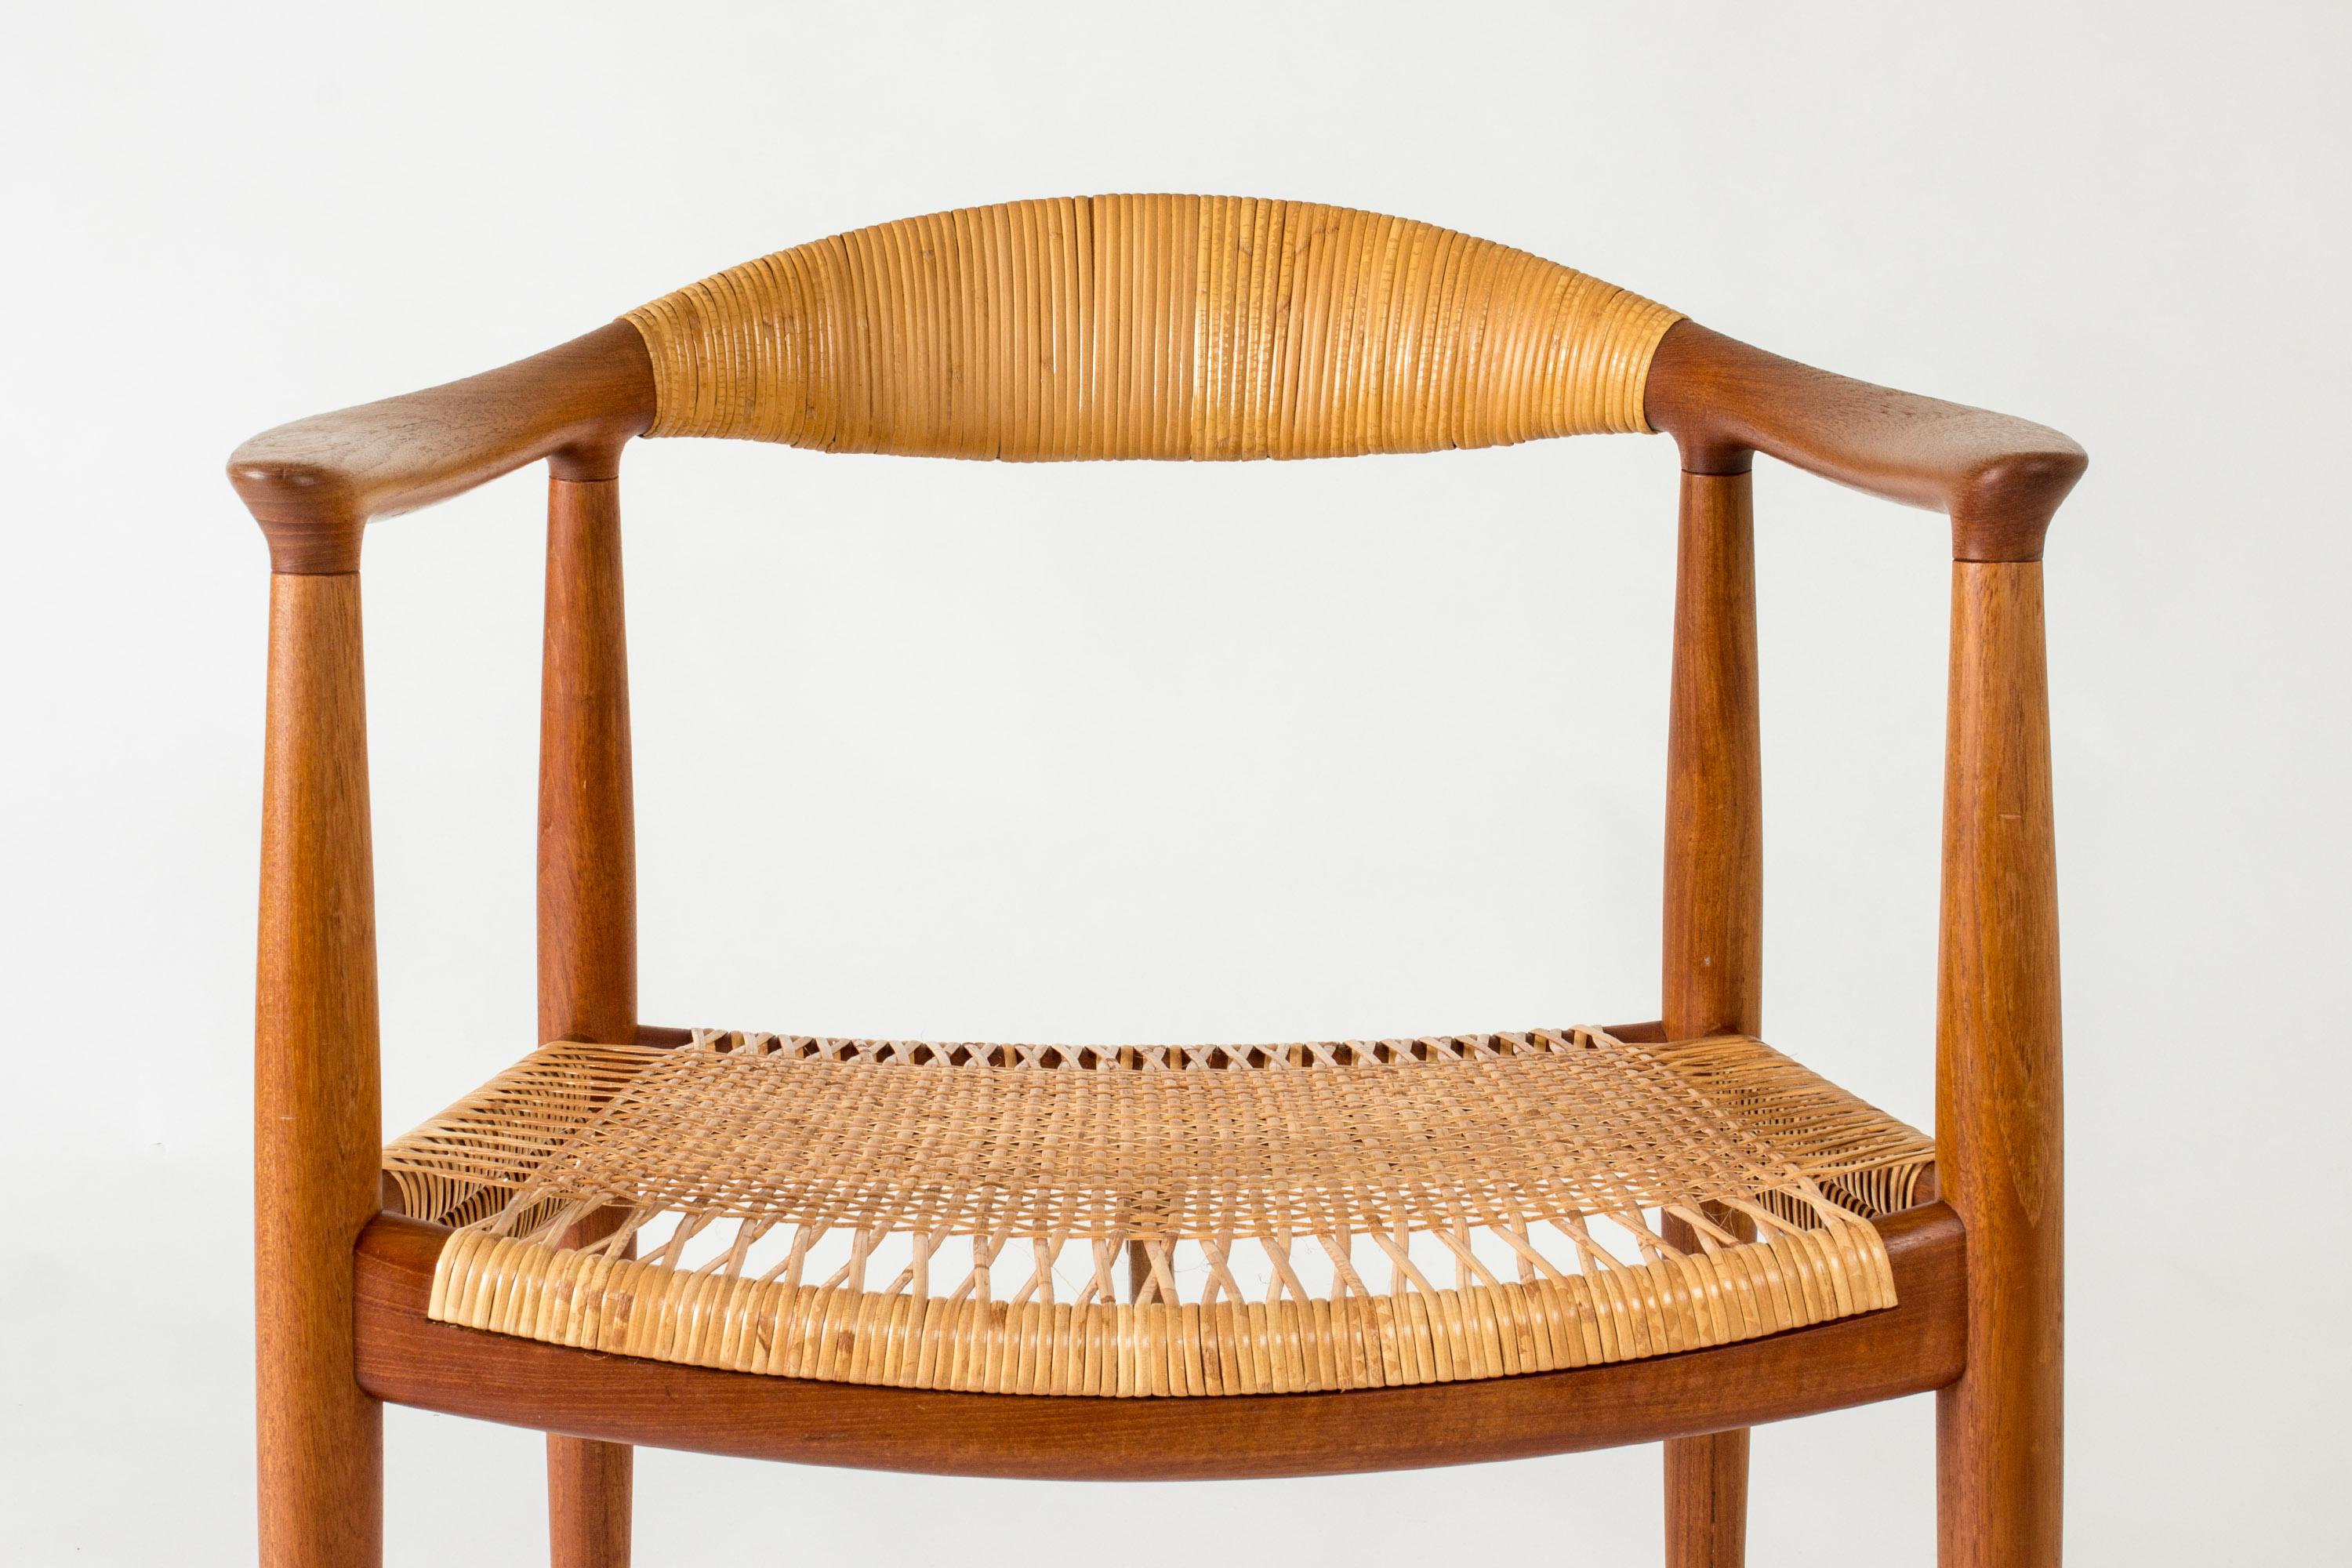 Beautifully designed and crafted teak and rattan “The Chair” armchair by Hans J. Wegner.

“The Chair” was designed in 1949 and became a huge success upon its launch. The model was important in advocating Danish design internationally. Its iconic